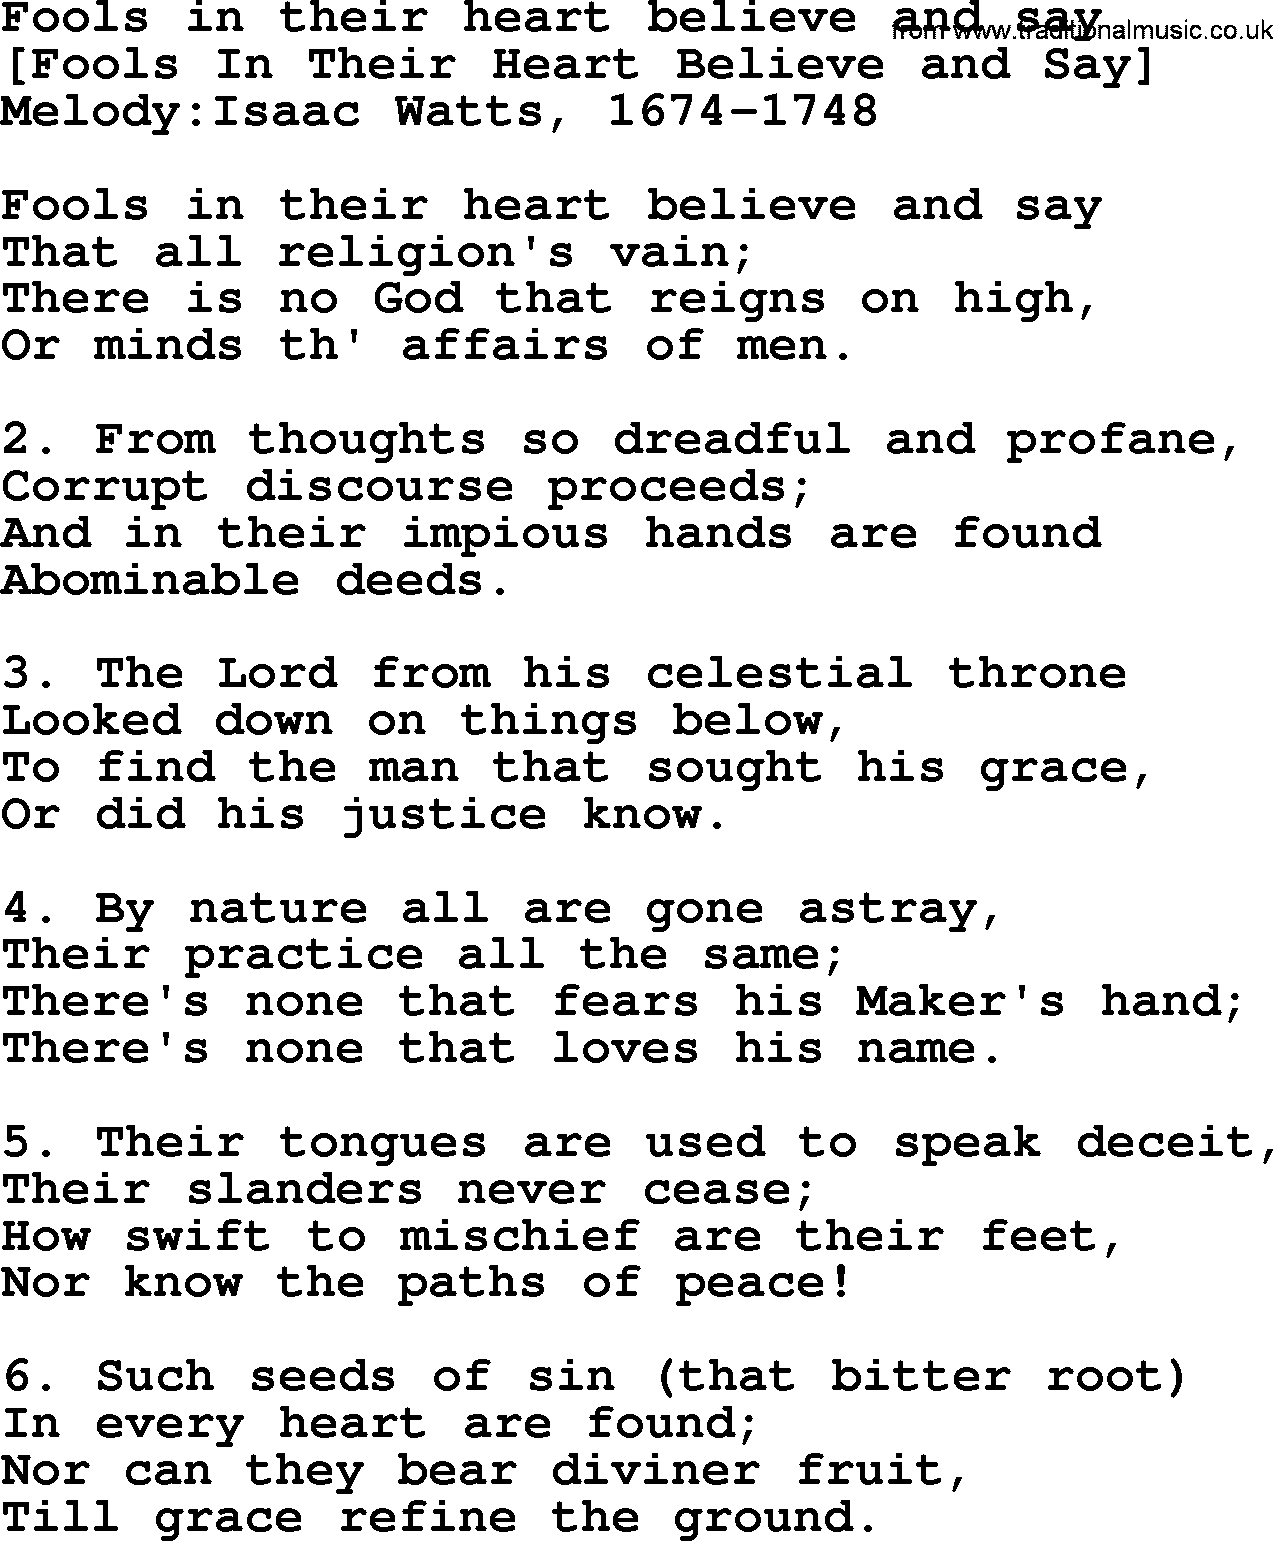 Old English Song: Fools In Their Heart Believe And Say lyrics